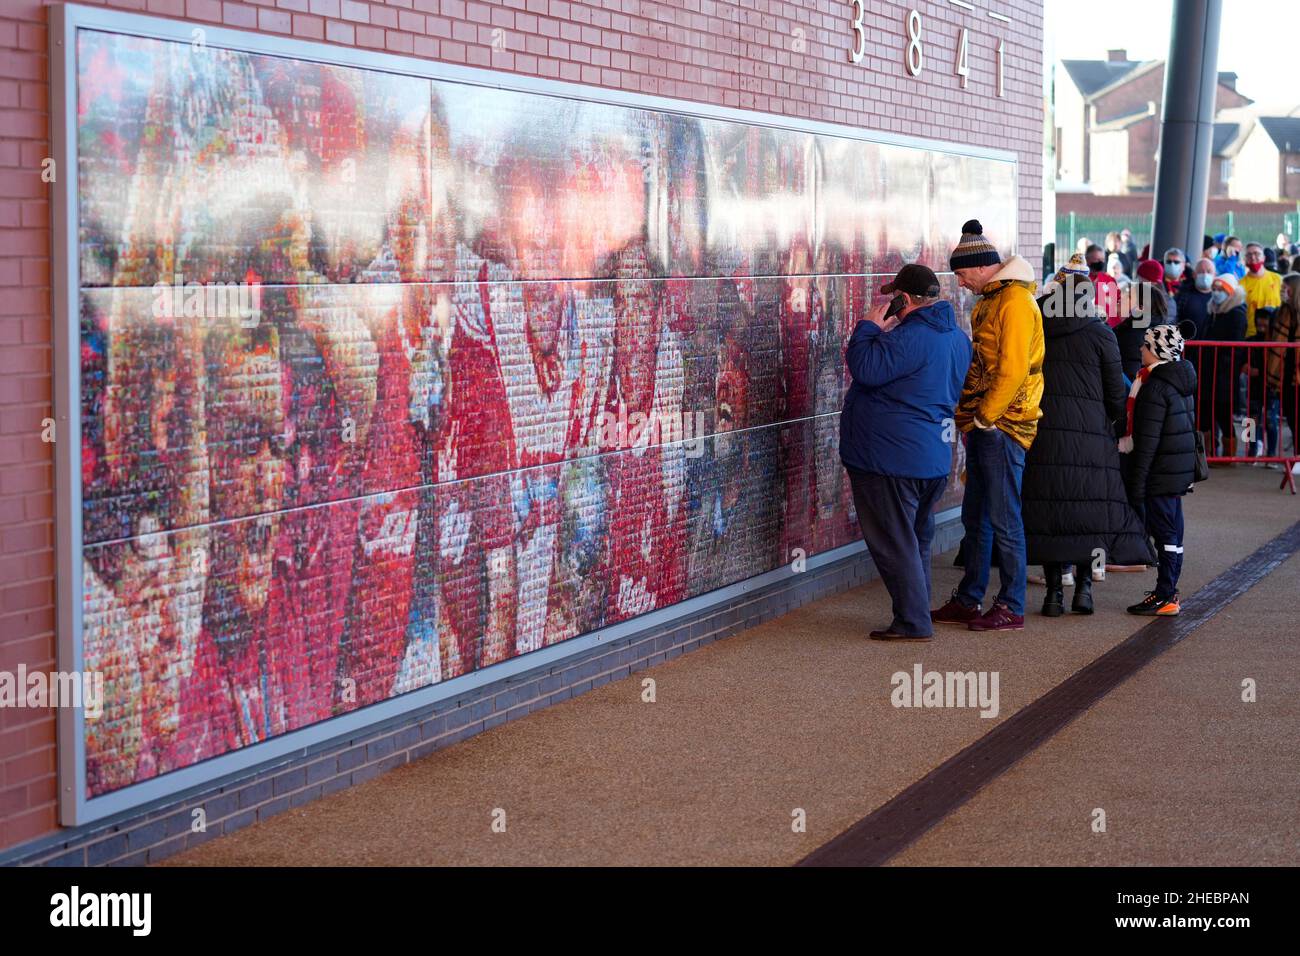 Liverpool fans before the game Picture by Steve Flynn/AHPIX.com, Football: Emirates FA Cup 3rd Round match Liverpool -V- Shrewsbury Town at Anfield, L Stock Photo